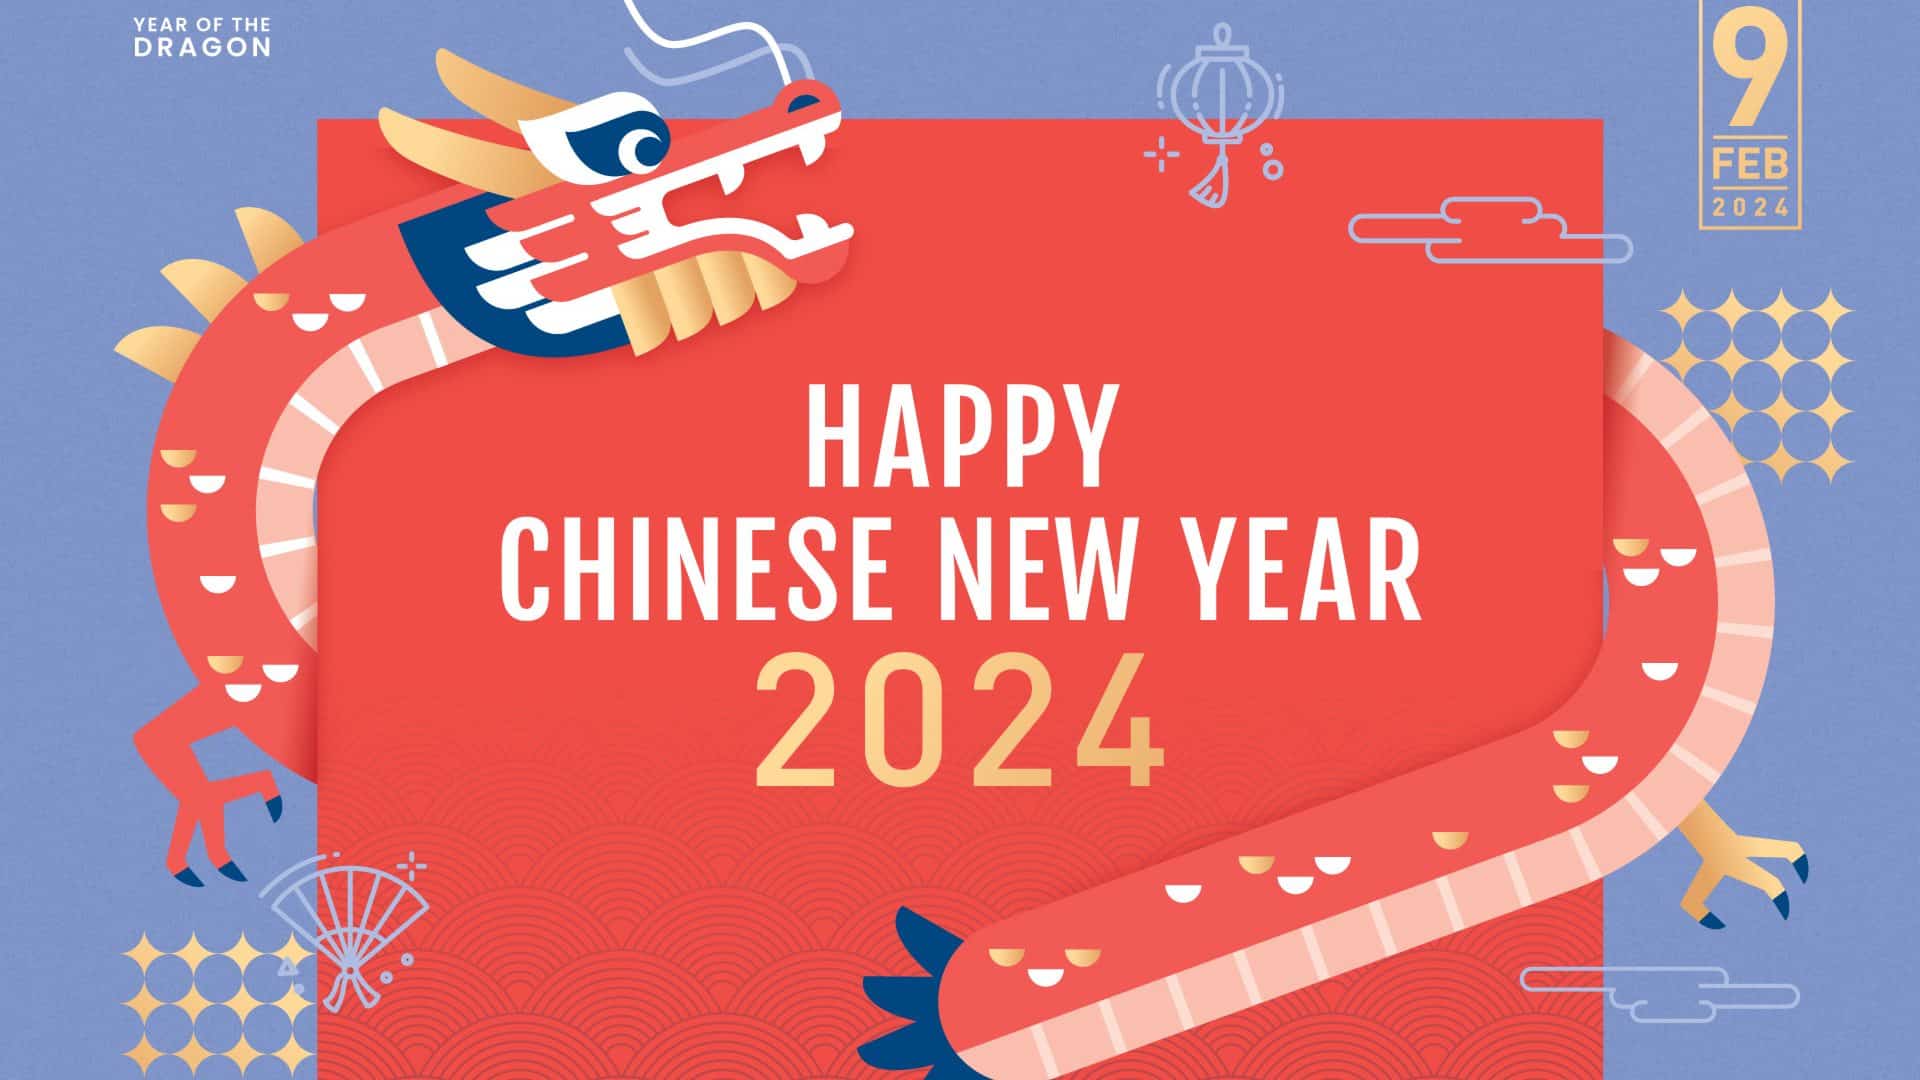 CHINESE NEW YEAR 2024 – THE YEAR OF DRAGON